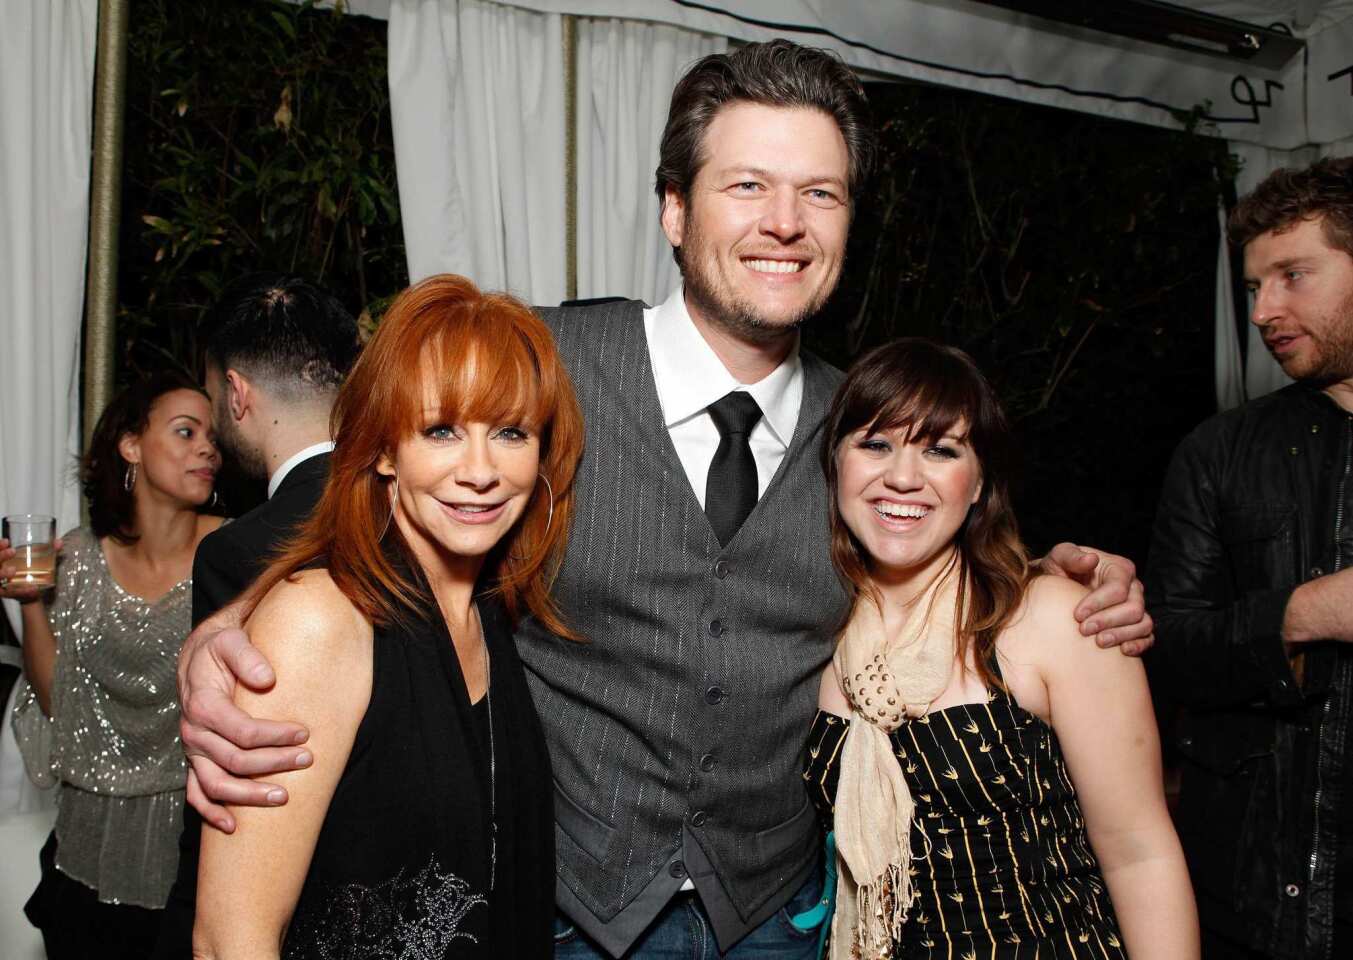 Country music singer Reba McEntire, left, with "The Voice" judge Blake Shelton and "American Idol" alum Kelly Clarkson.